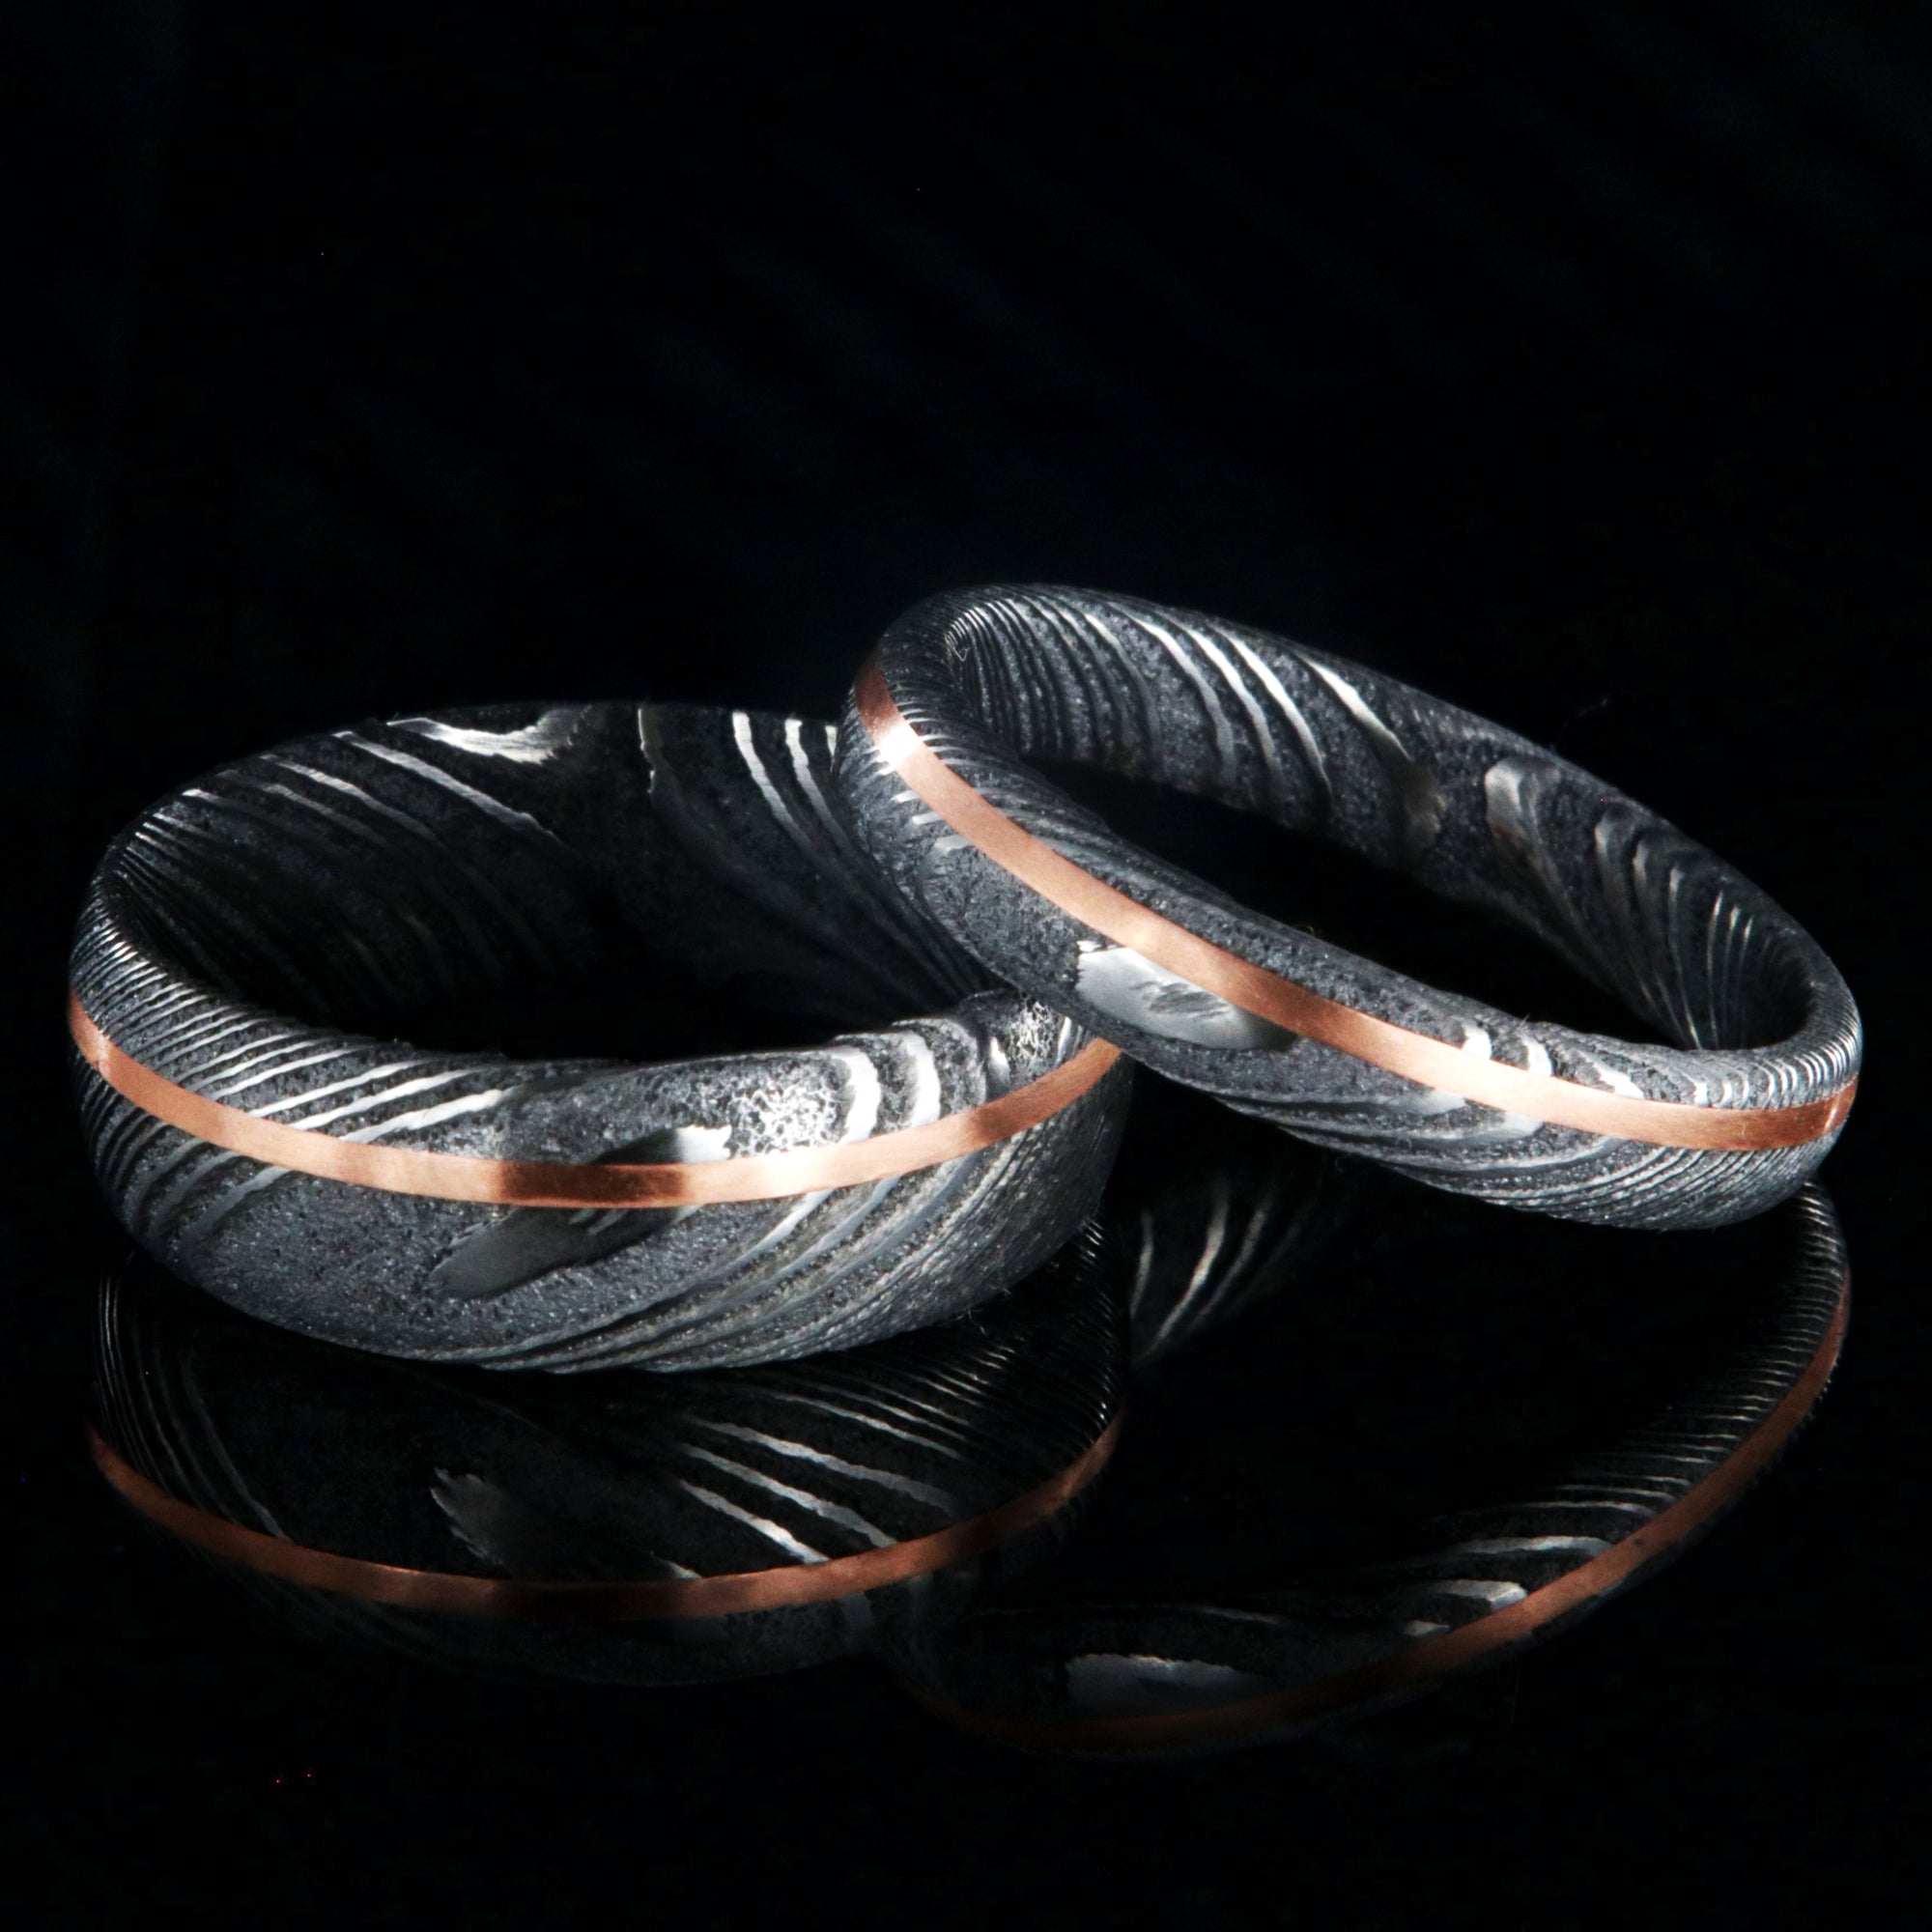 Matching his and her Damascus steel ring set. 7mm and 4mm wide Damascus steel rings with copper inlay